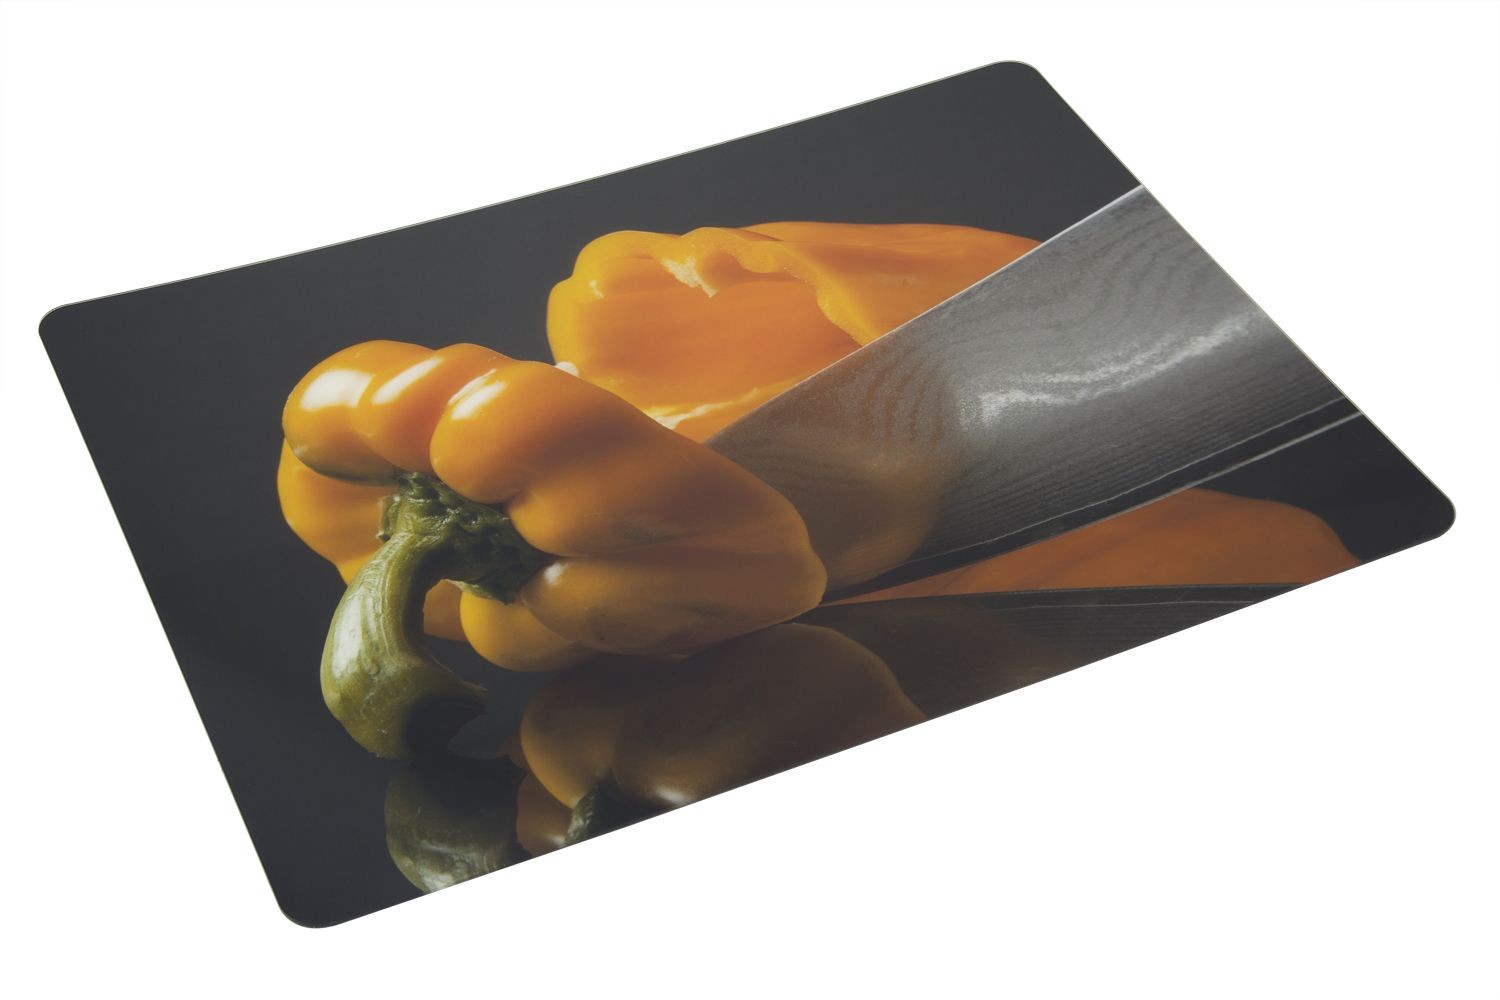 Bon Chef 50156HS-4 Acrylic High Street Center Panel, Yellow Pepper with French Knife